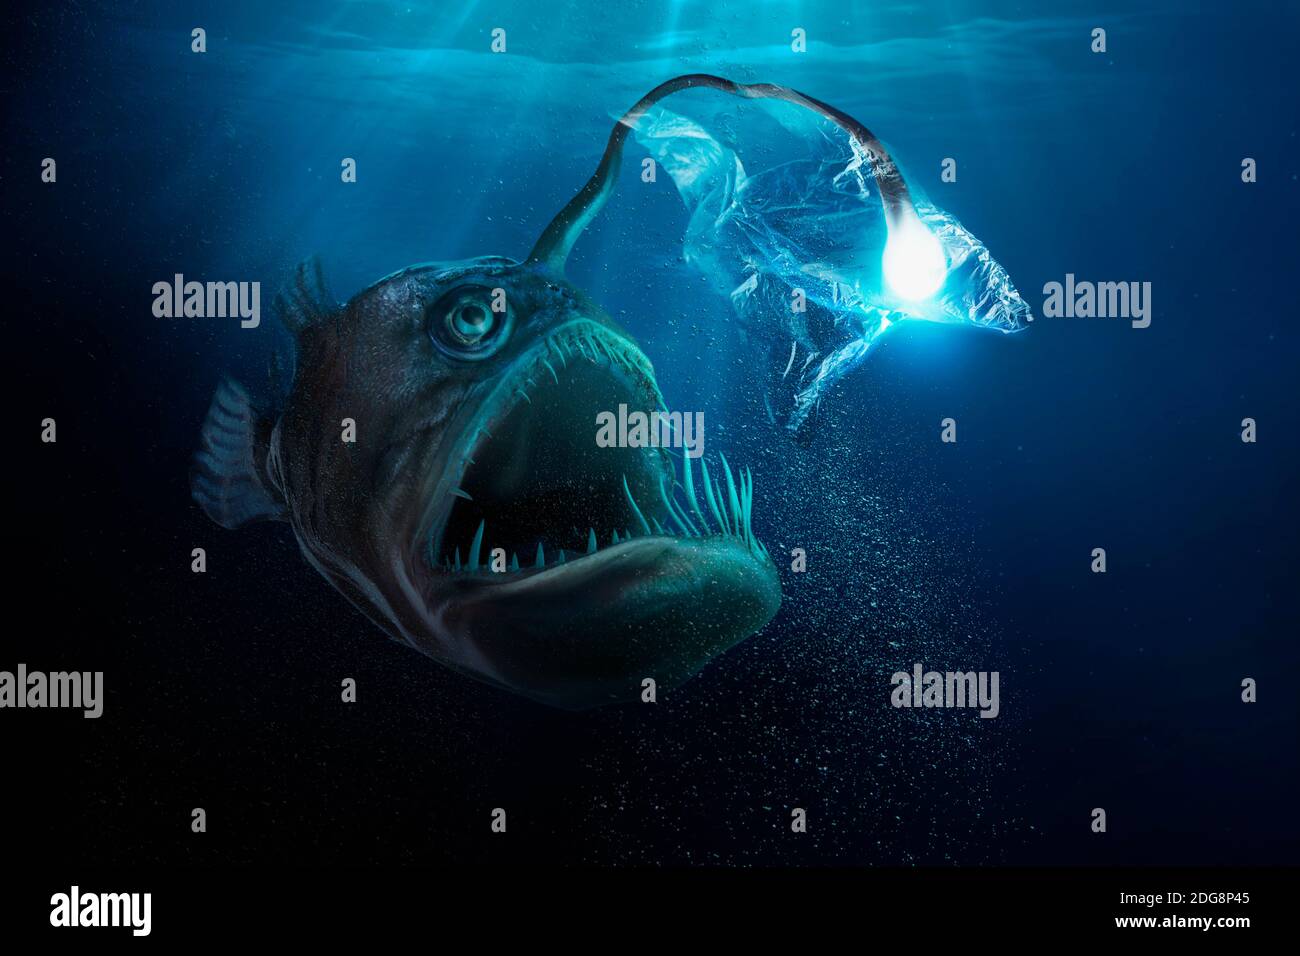 Large deep sea fish with light bulb trapped in plastic bag Stock Photo